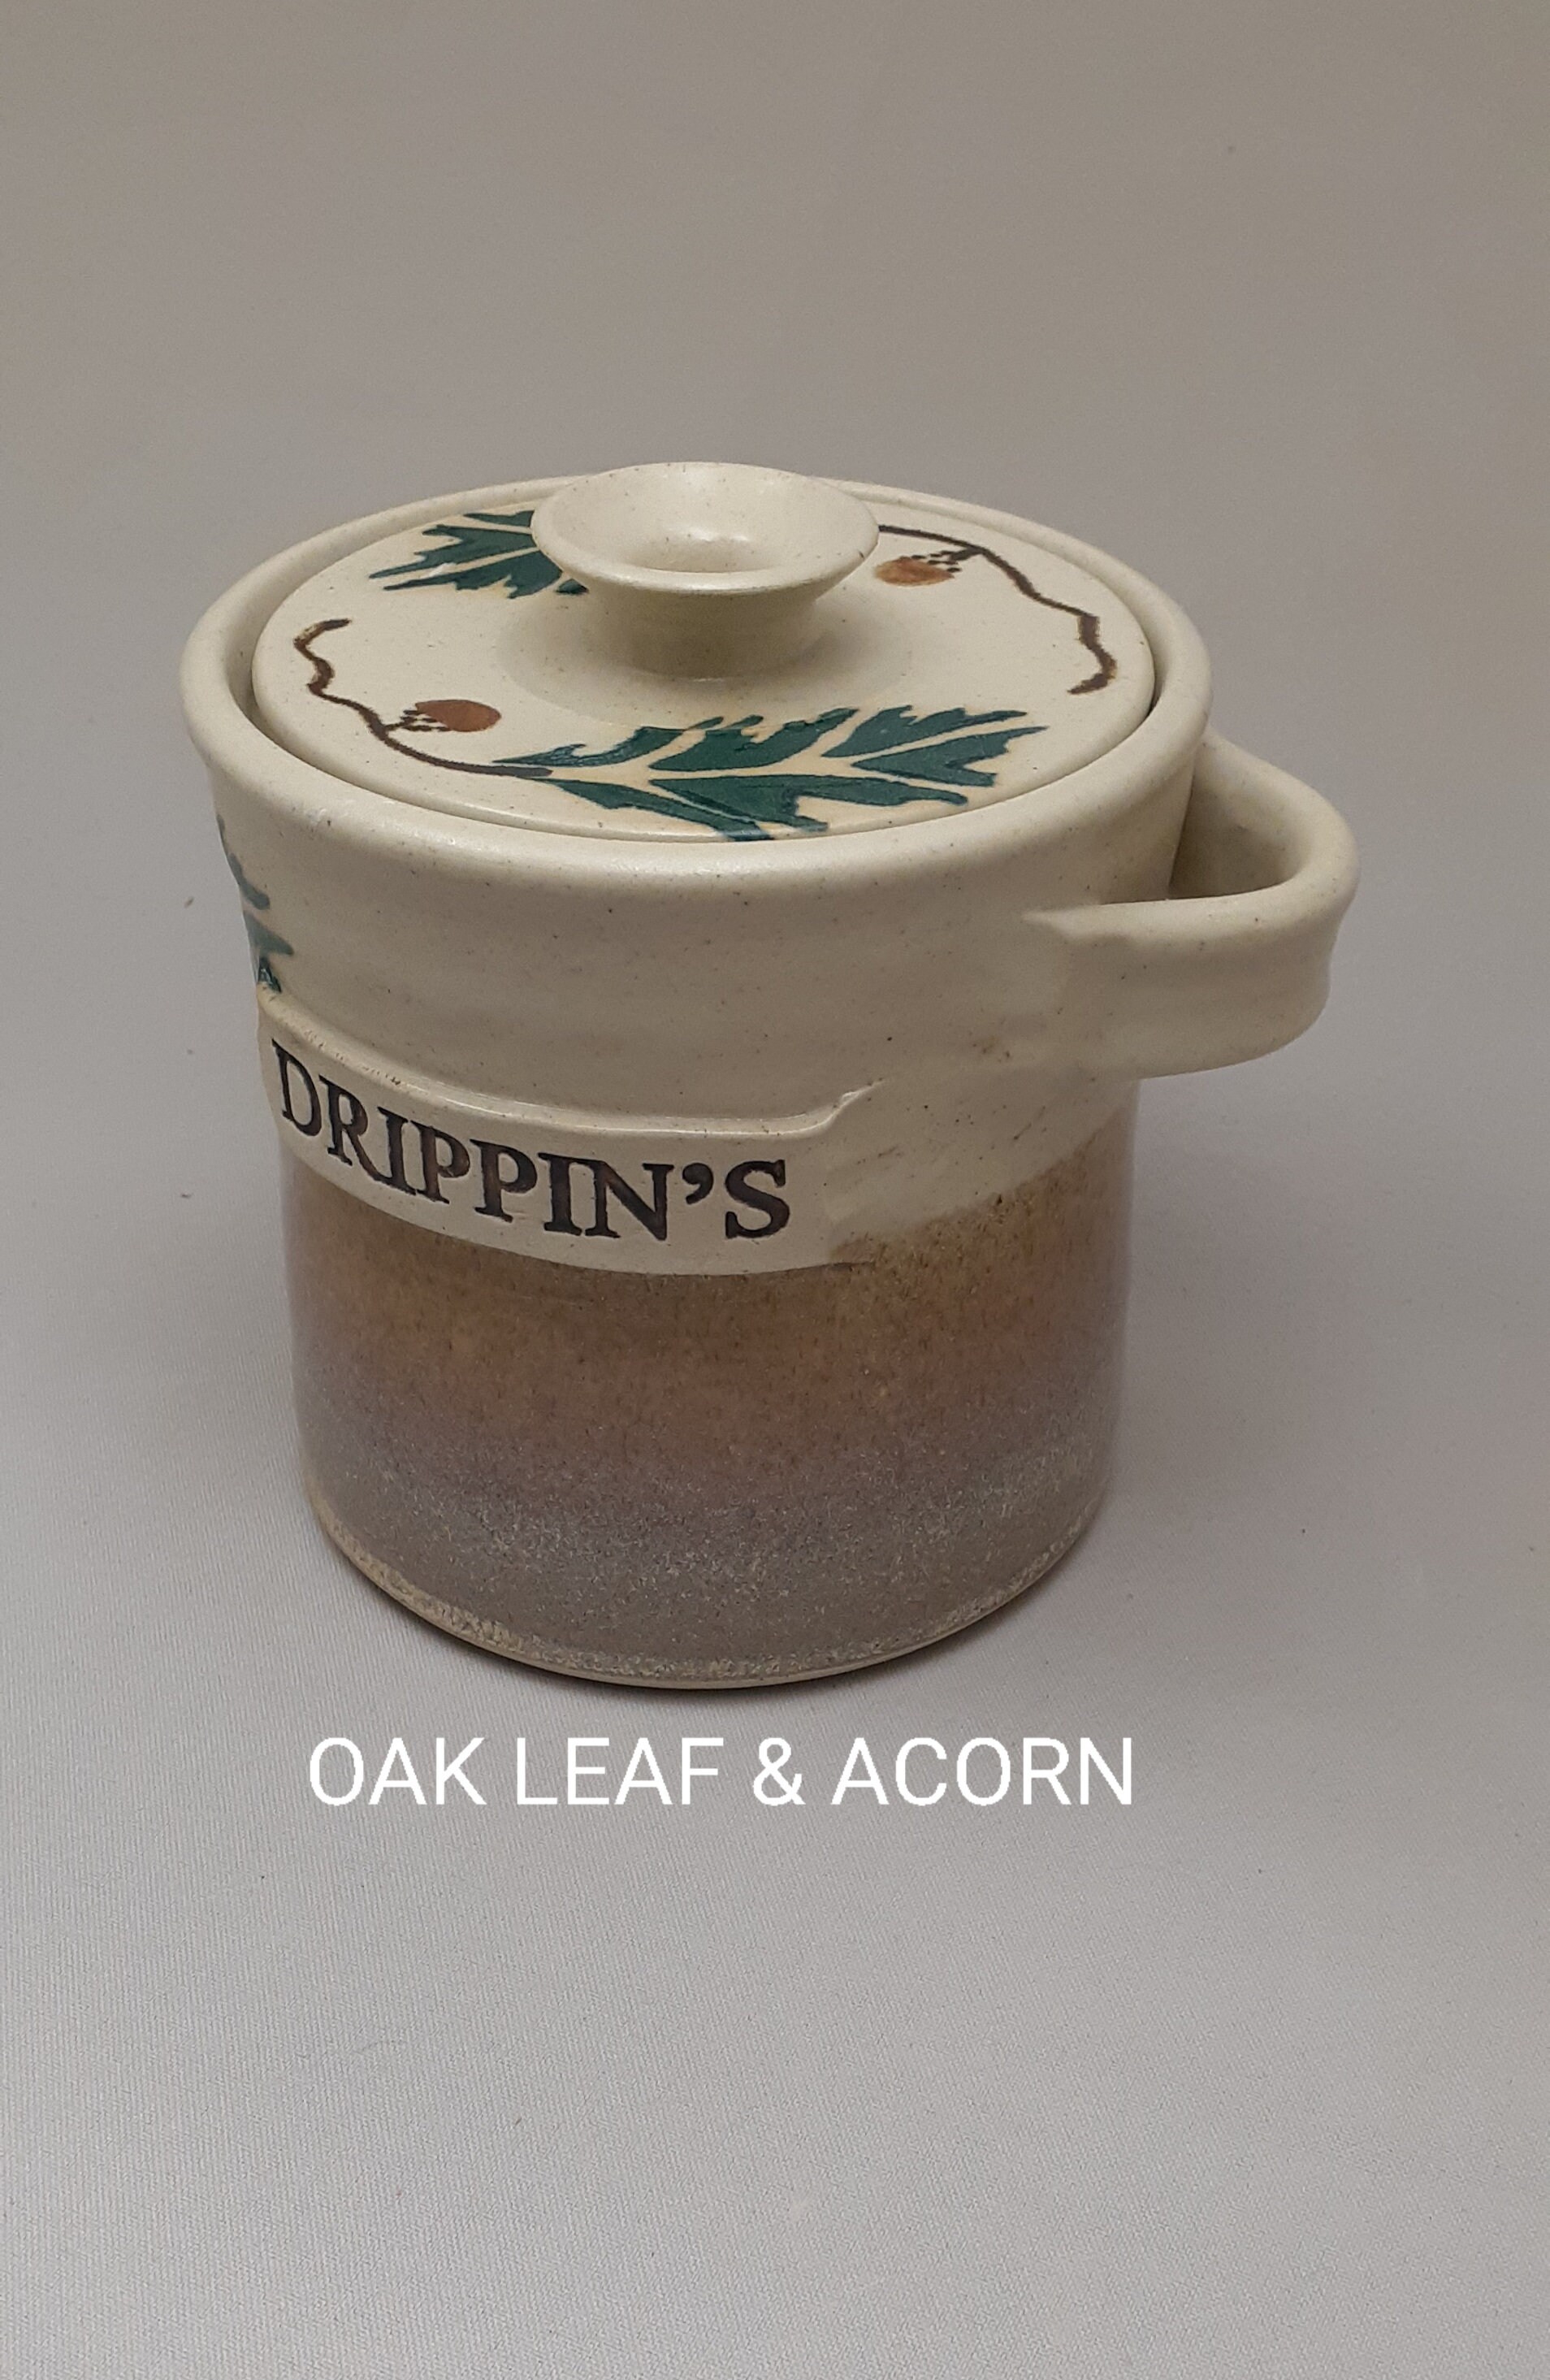 Grease Jar, Drippings Jar, Pottery, Ceramic, Drippings Container